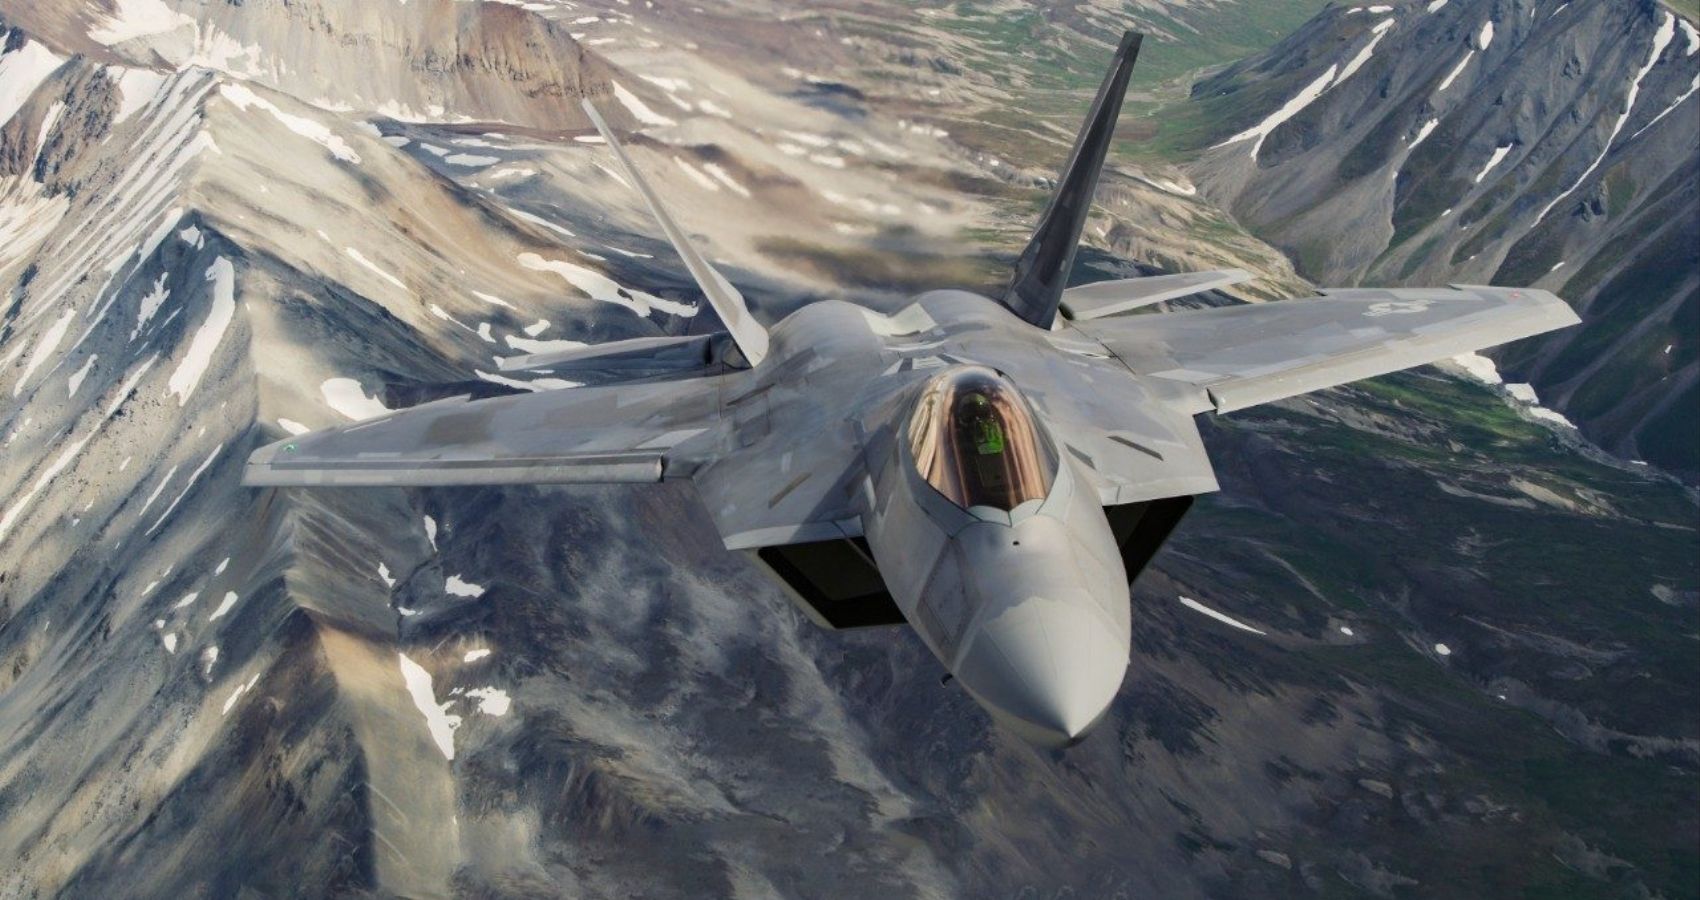 This Is Why The United States Can't Export The F-22 Raptor